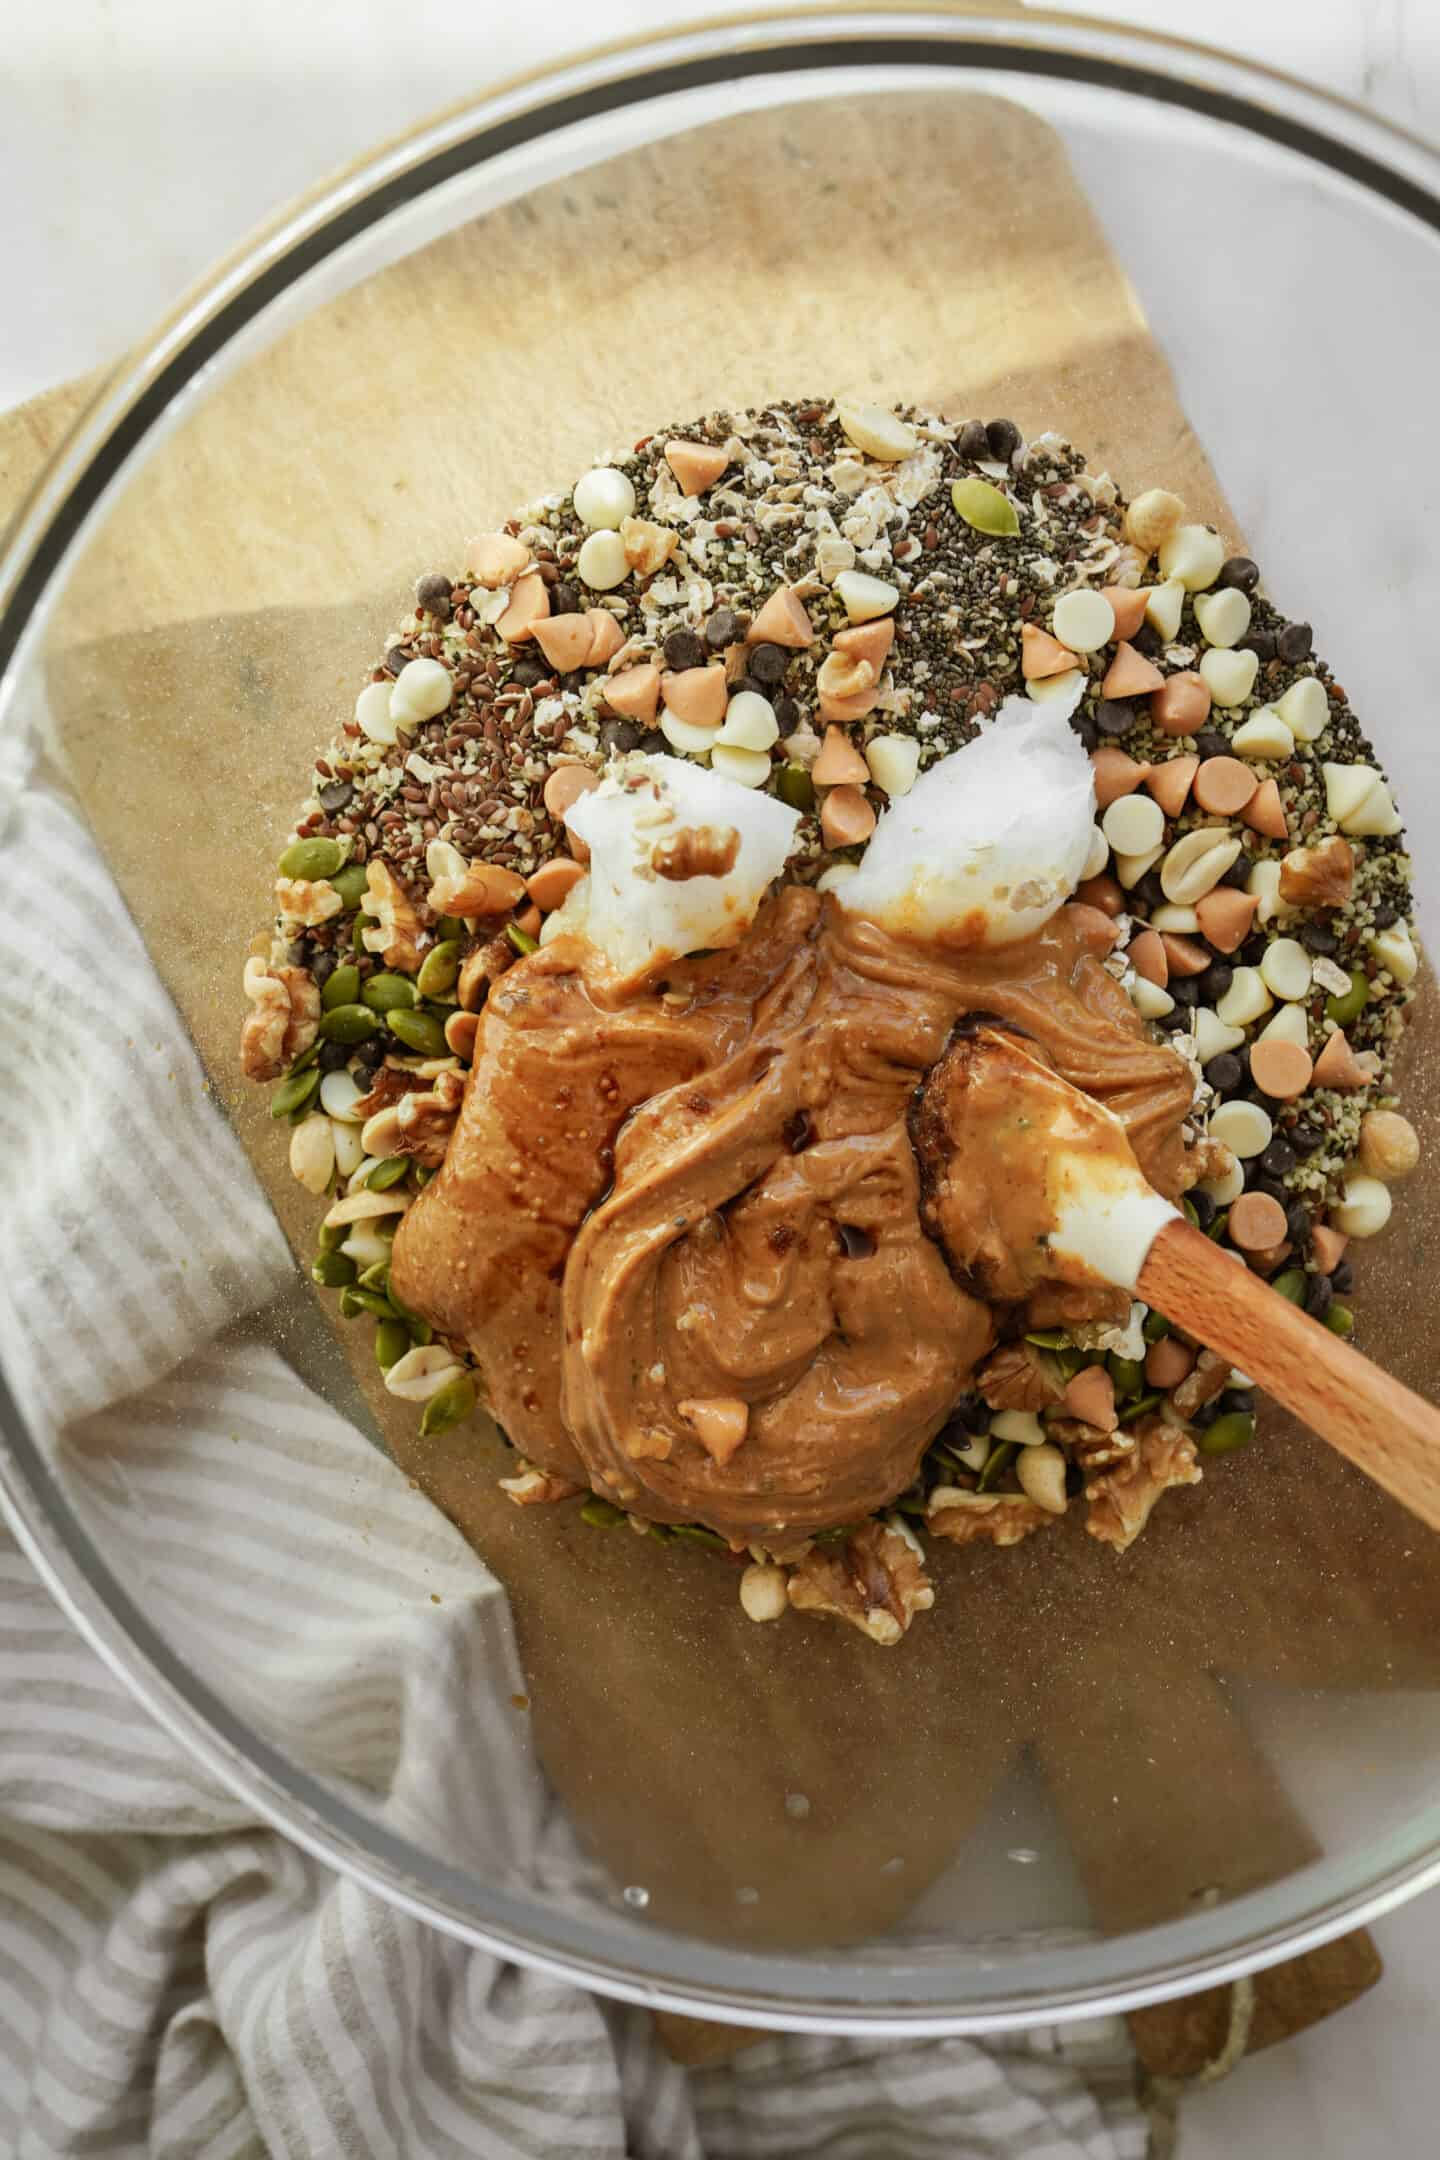 Ingredients for no-bake granola bars in a bowl